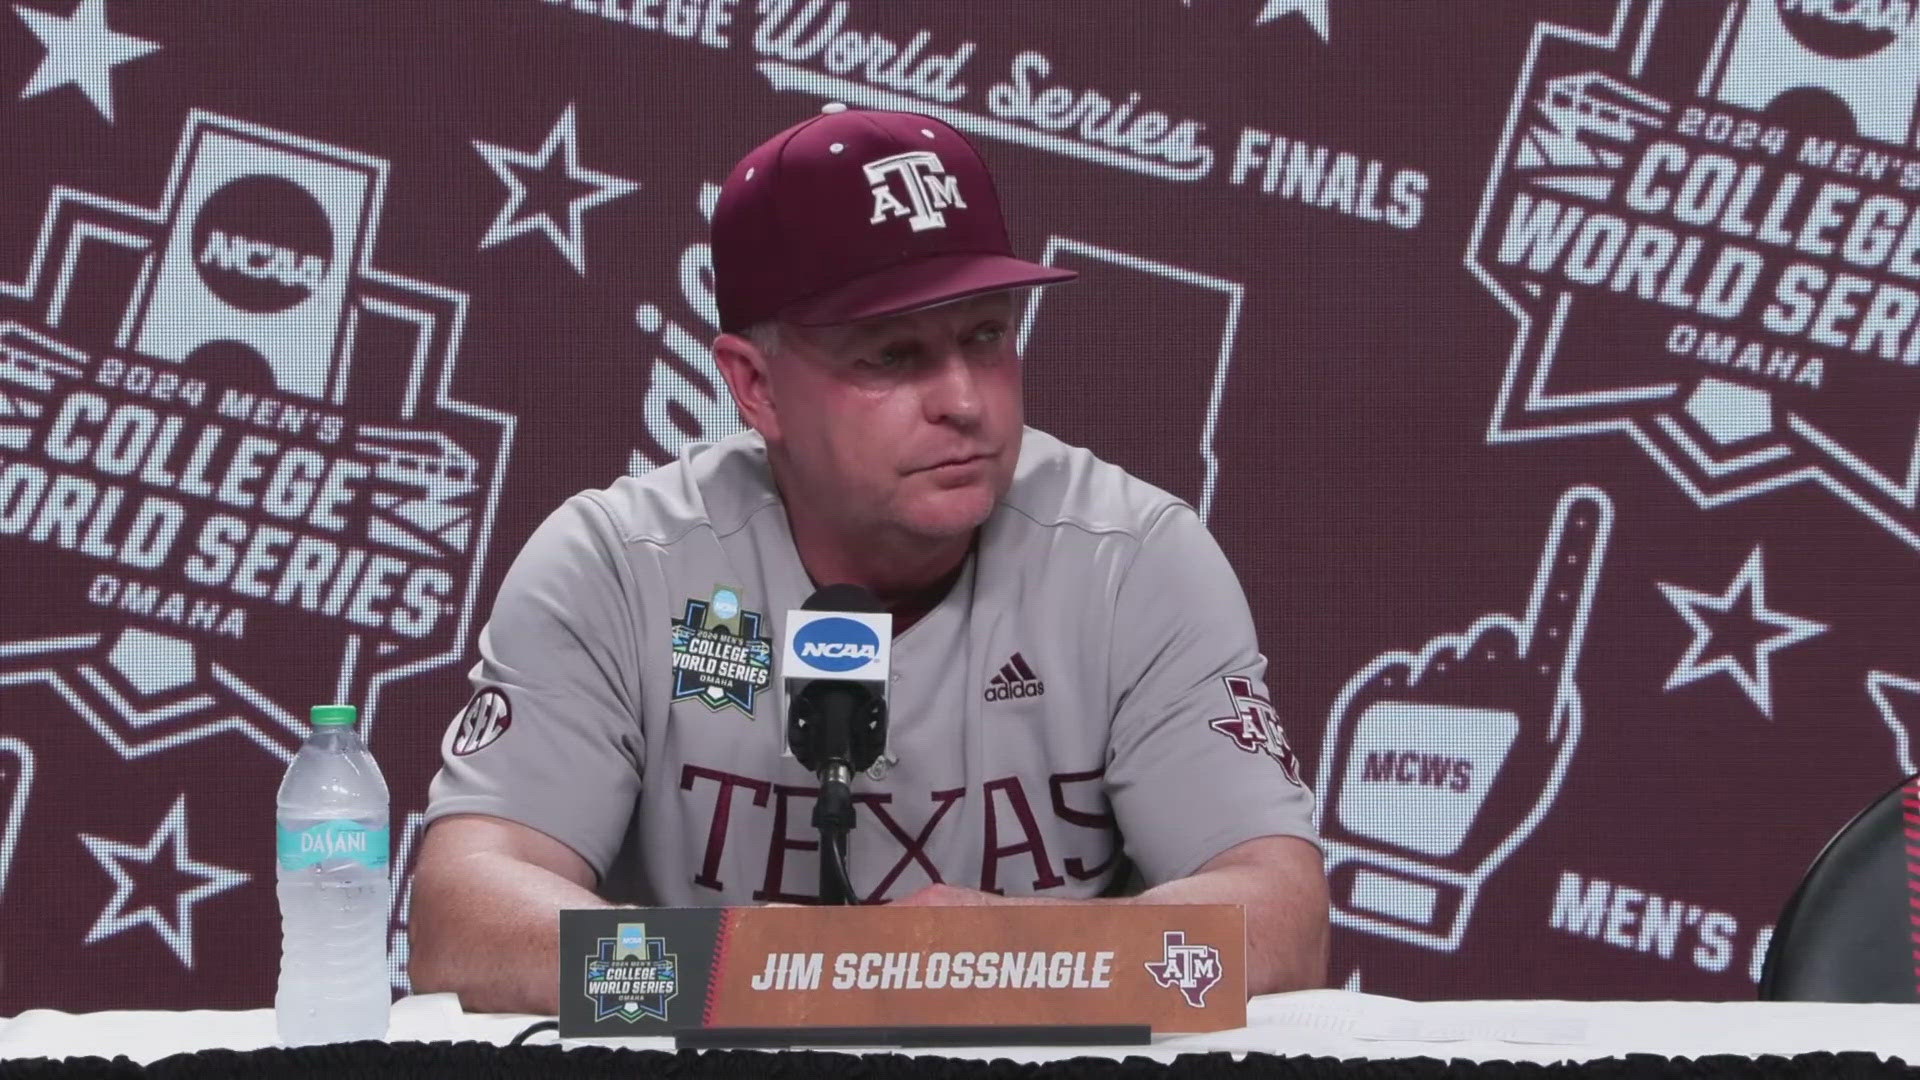 Jim Schlossnagle's new profile on "X" reads "Head Baseball Coach at the University of Texas at Austin".